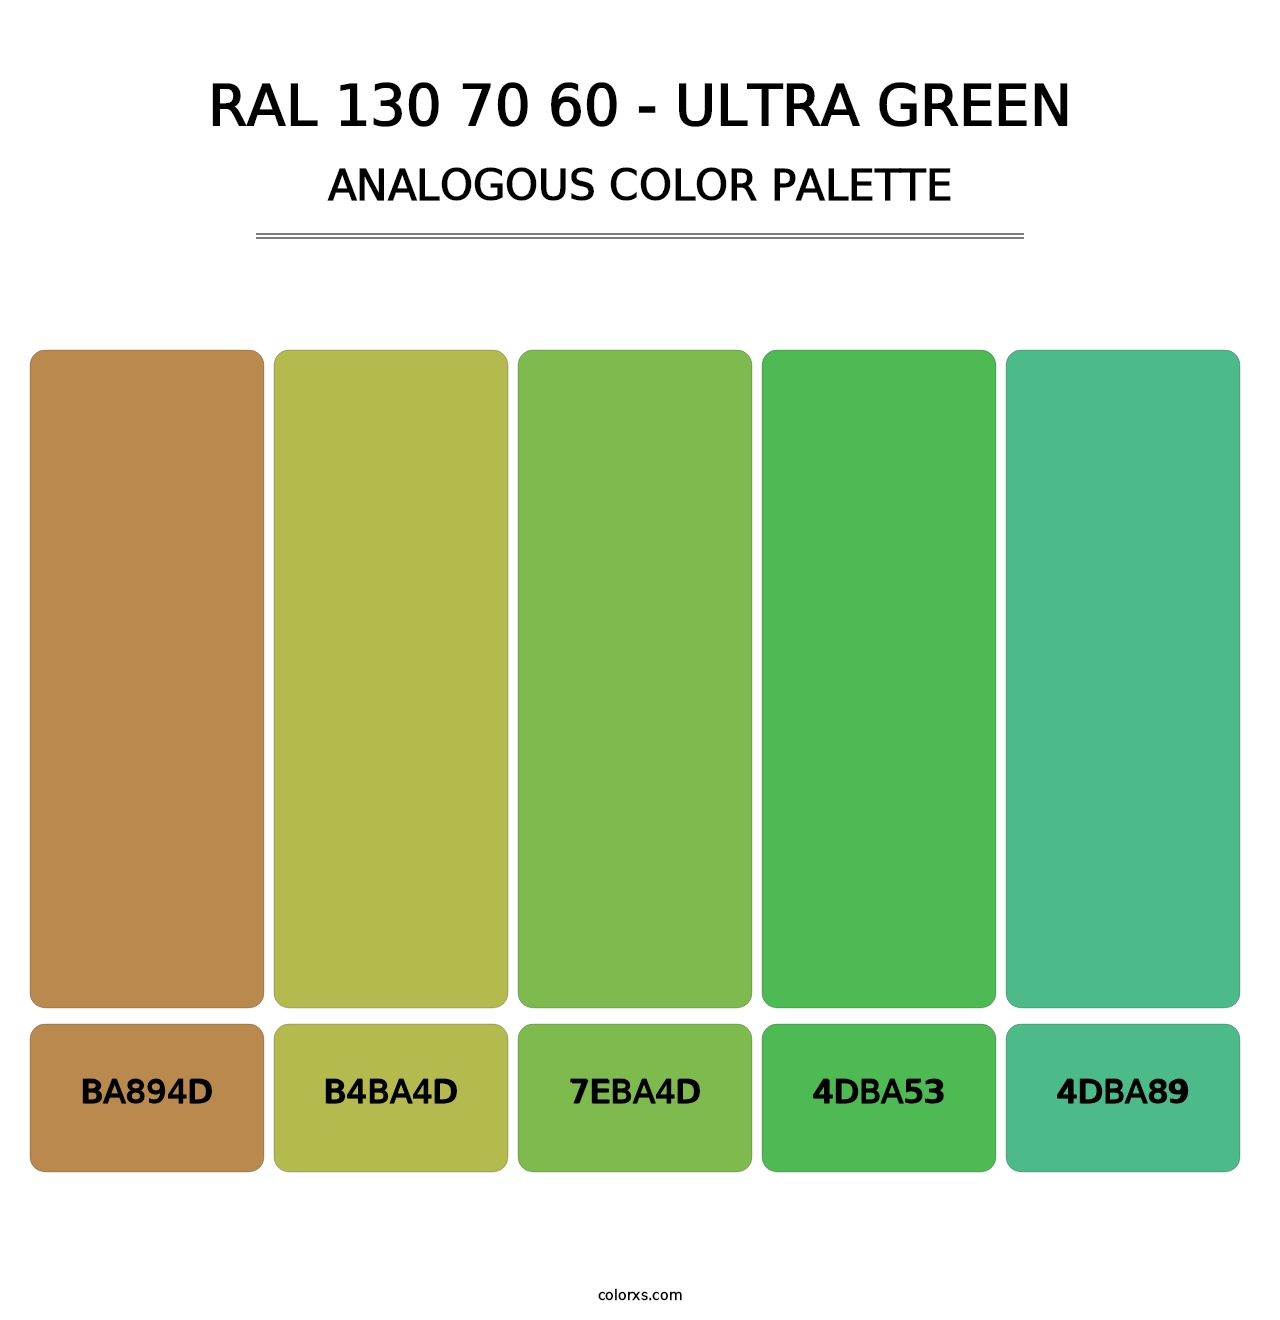 RAL 130 70 60 - Ultra Green - Analogous Color Palette